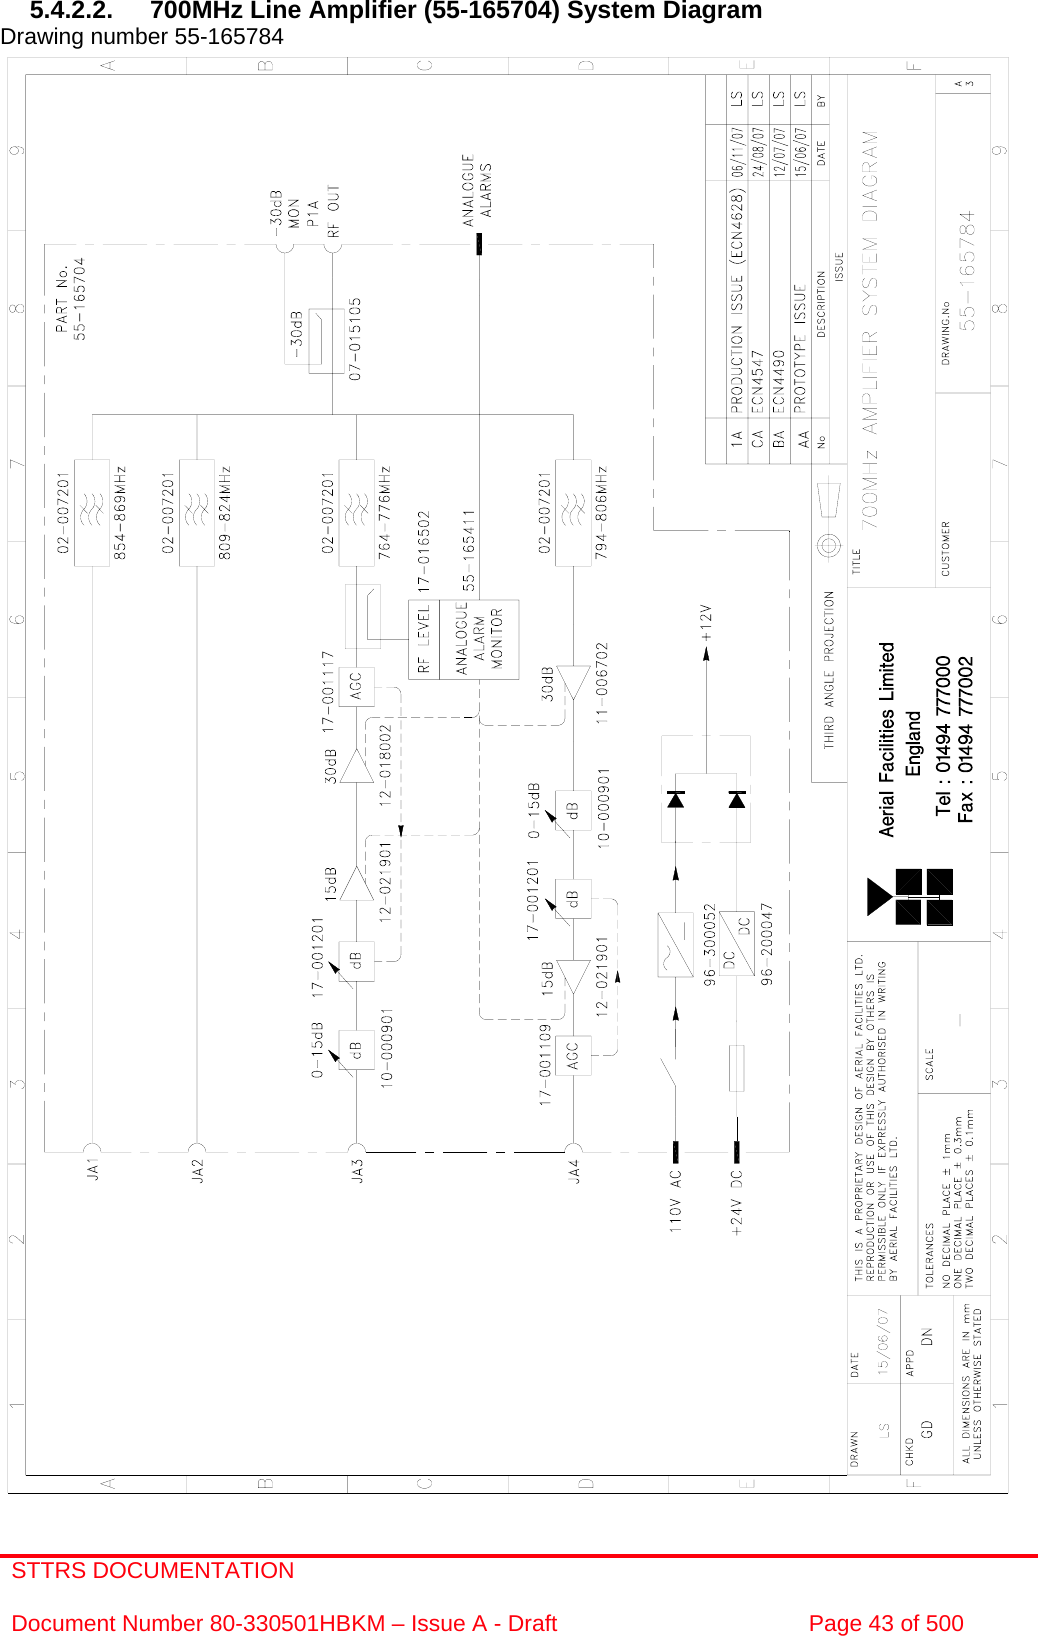 STTRS DOCUMENTATION  Document Number 80-330501HBKM – Issue A - Draft  Page 43 of 500   5.4.2.2.  700MHz Line Amplifier (55-165704) System Diagram Drawing number 55-165784                                                       